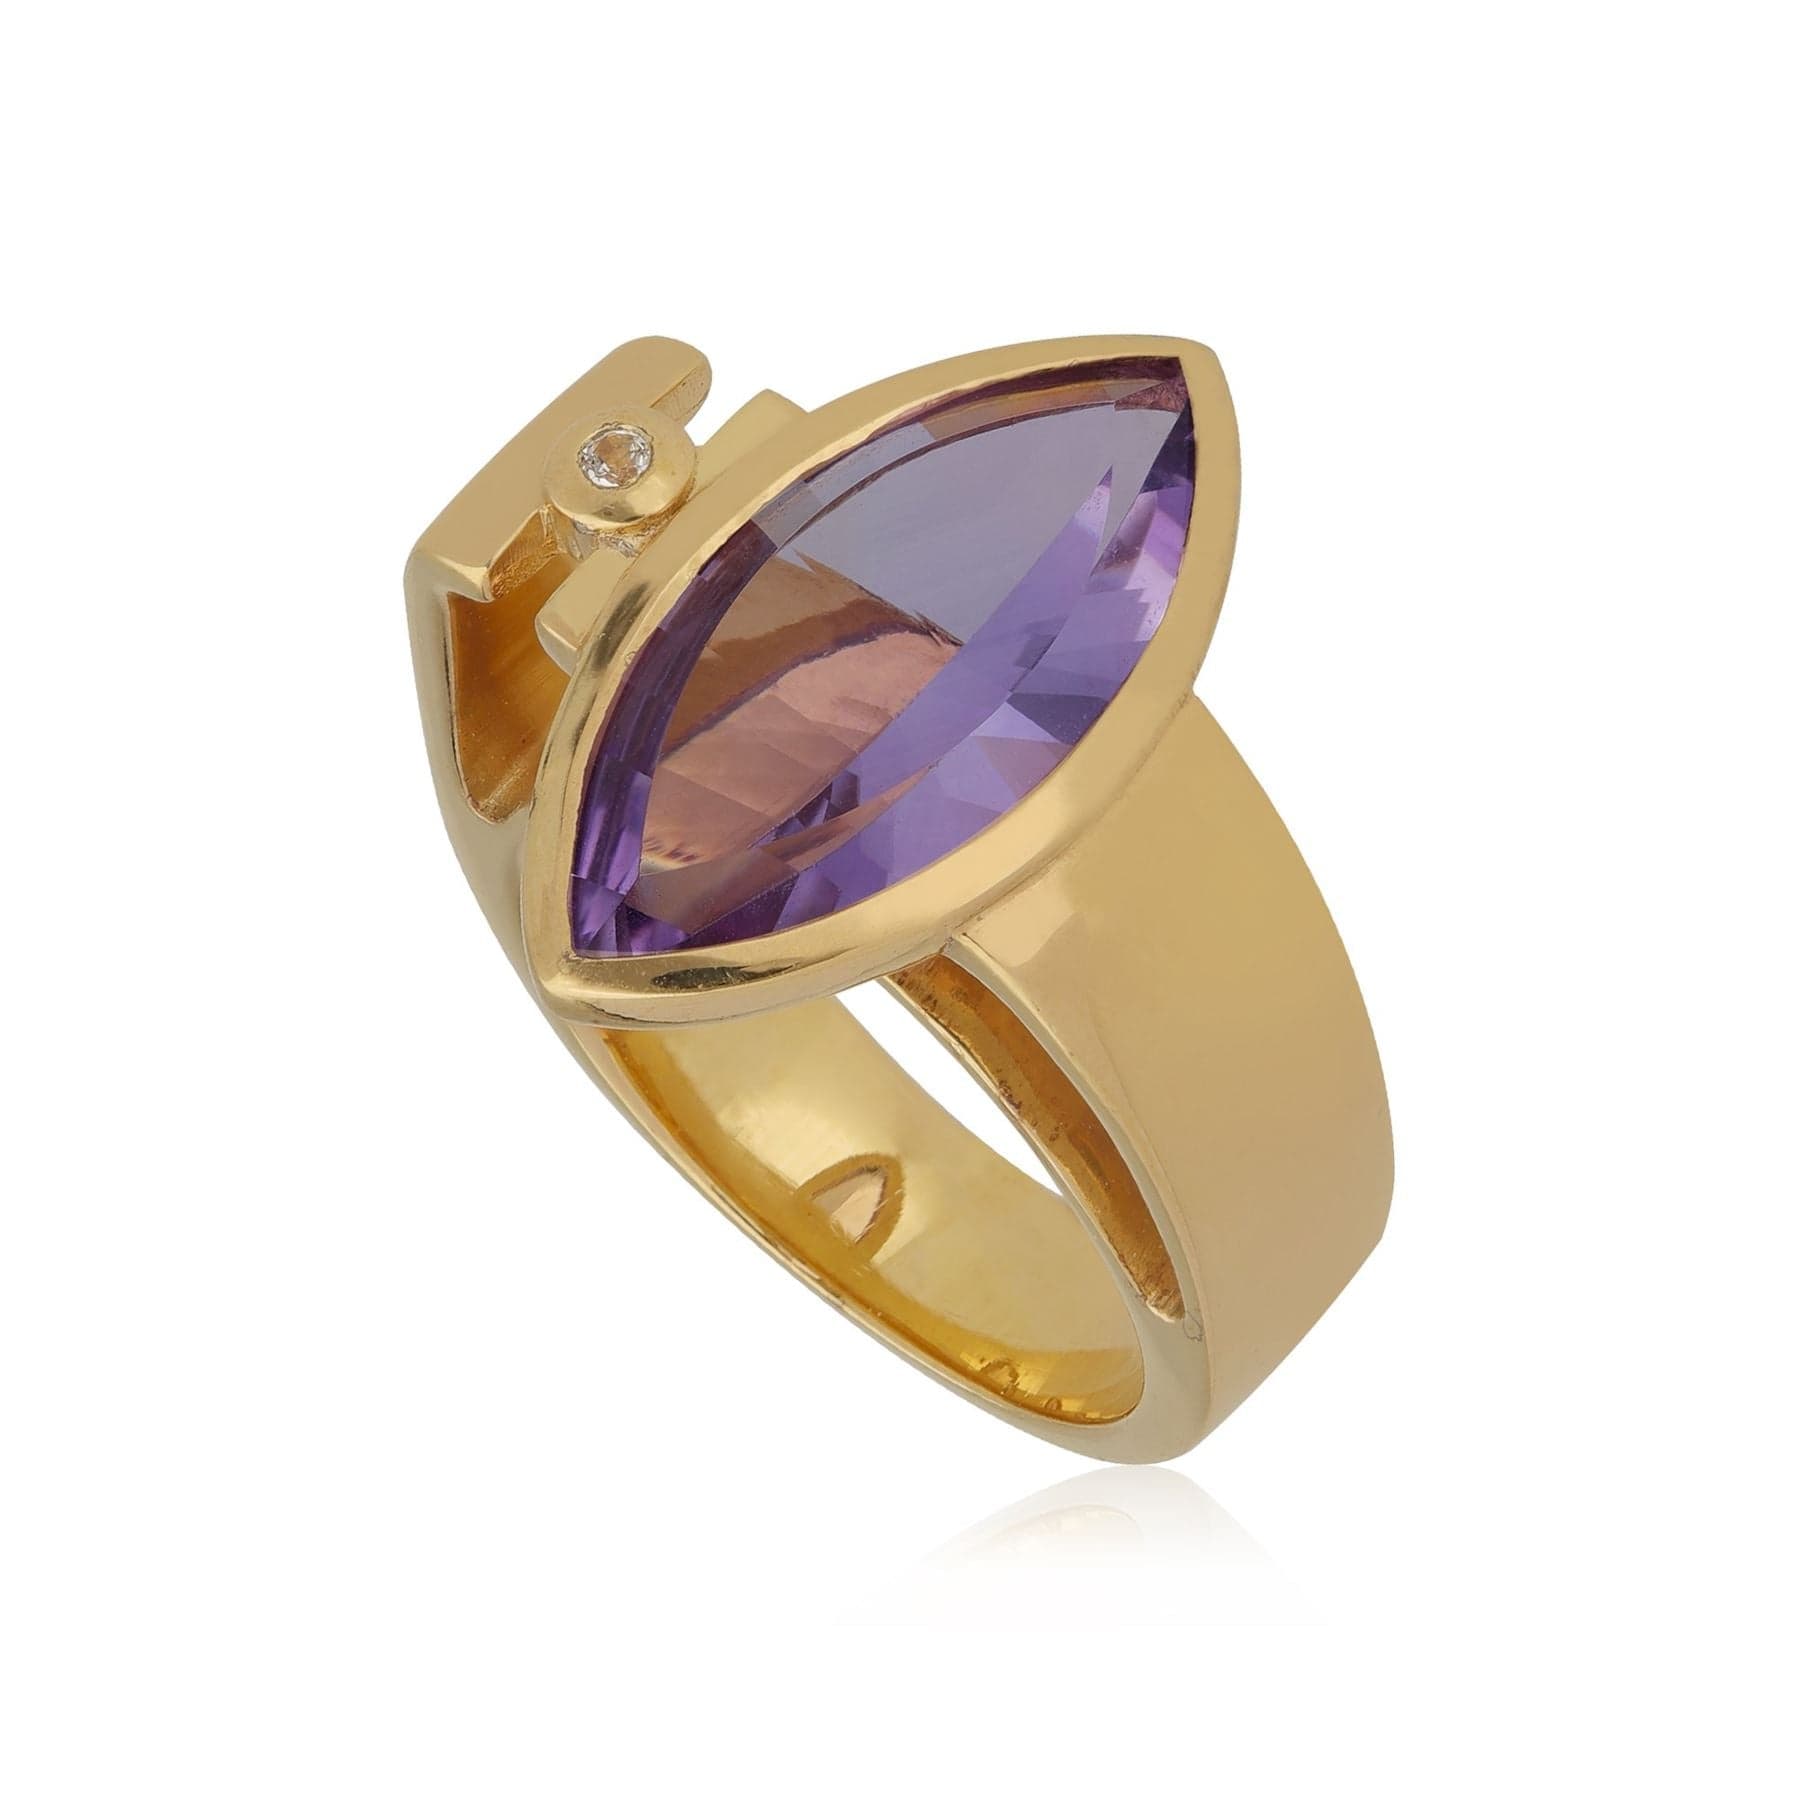 Kosmos Amethyst & Topaz Structural Ring in Gold Plated Sterling Silver - Gemondo